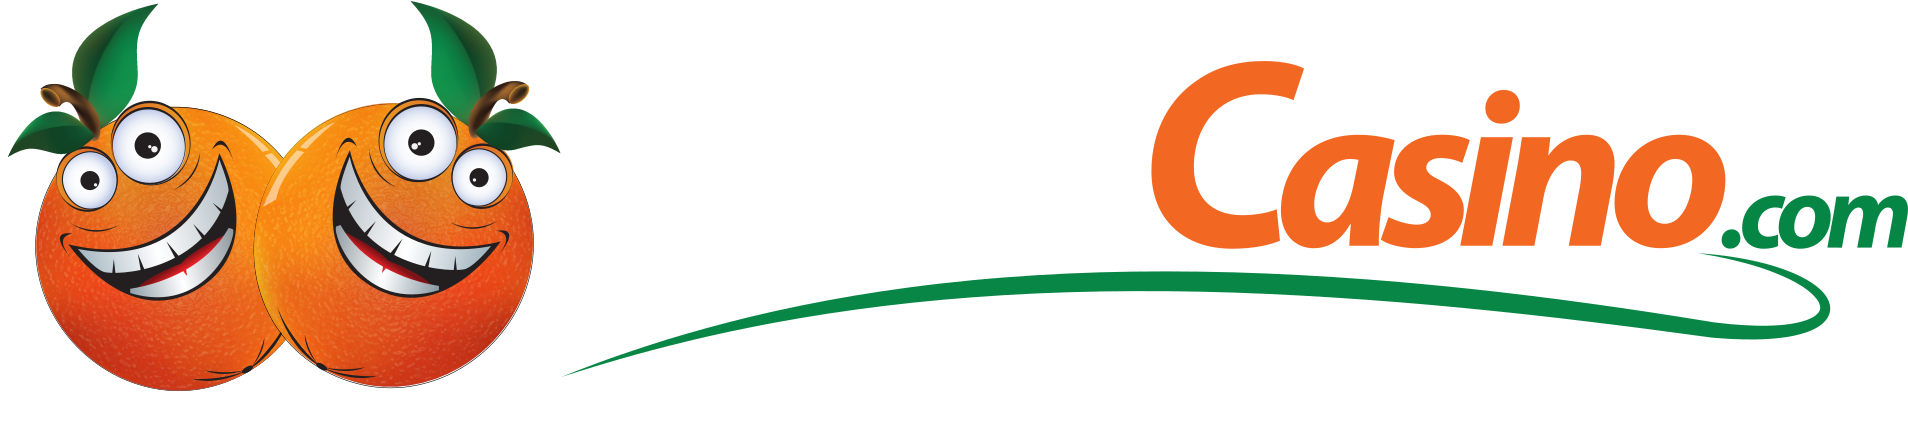 Casino as One of the Prime Online Casino Sites with free bonus